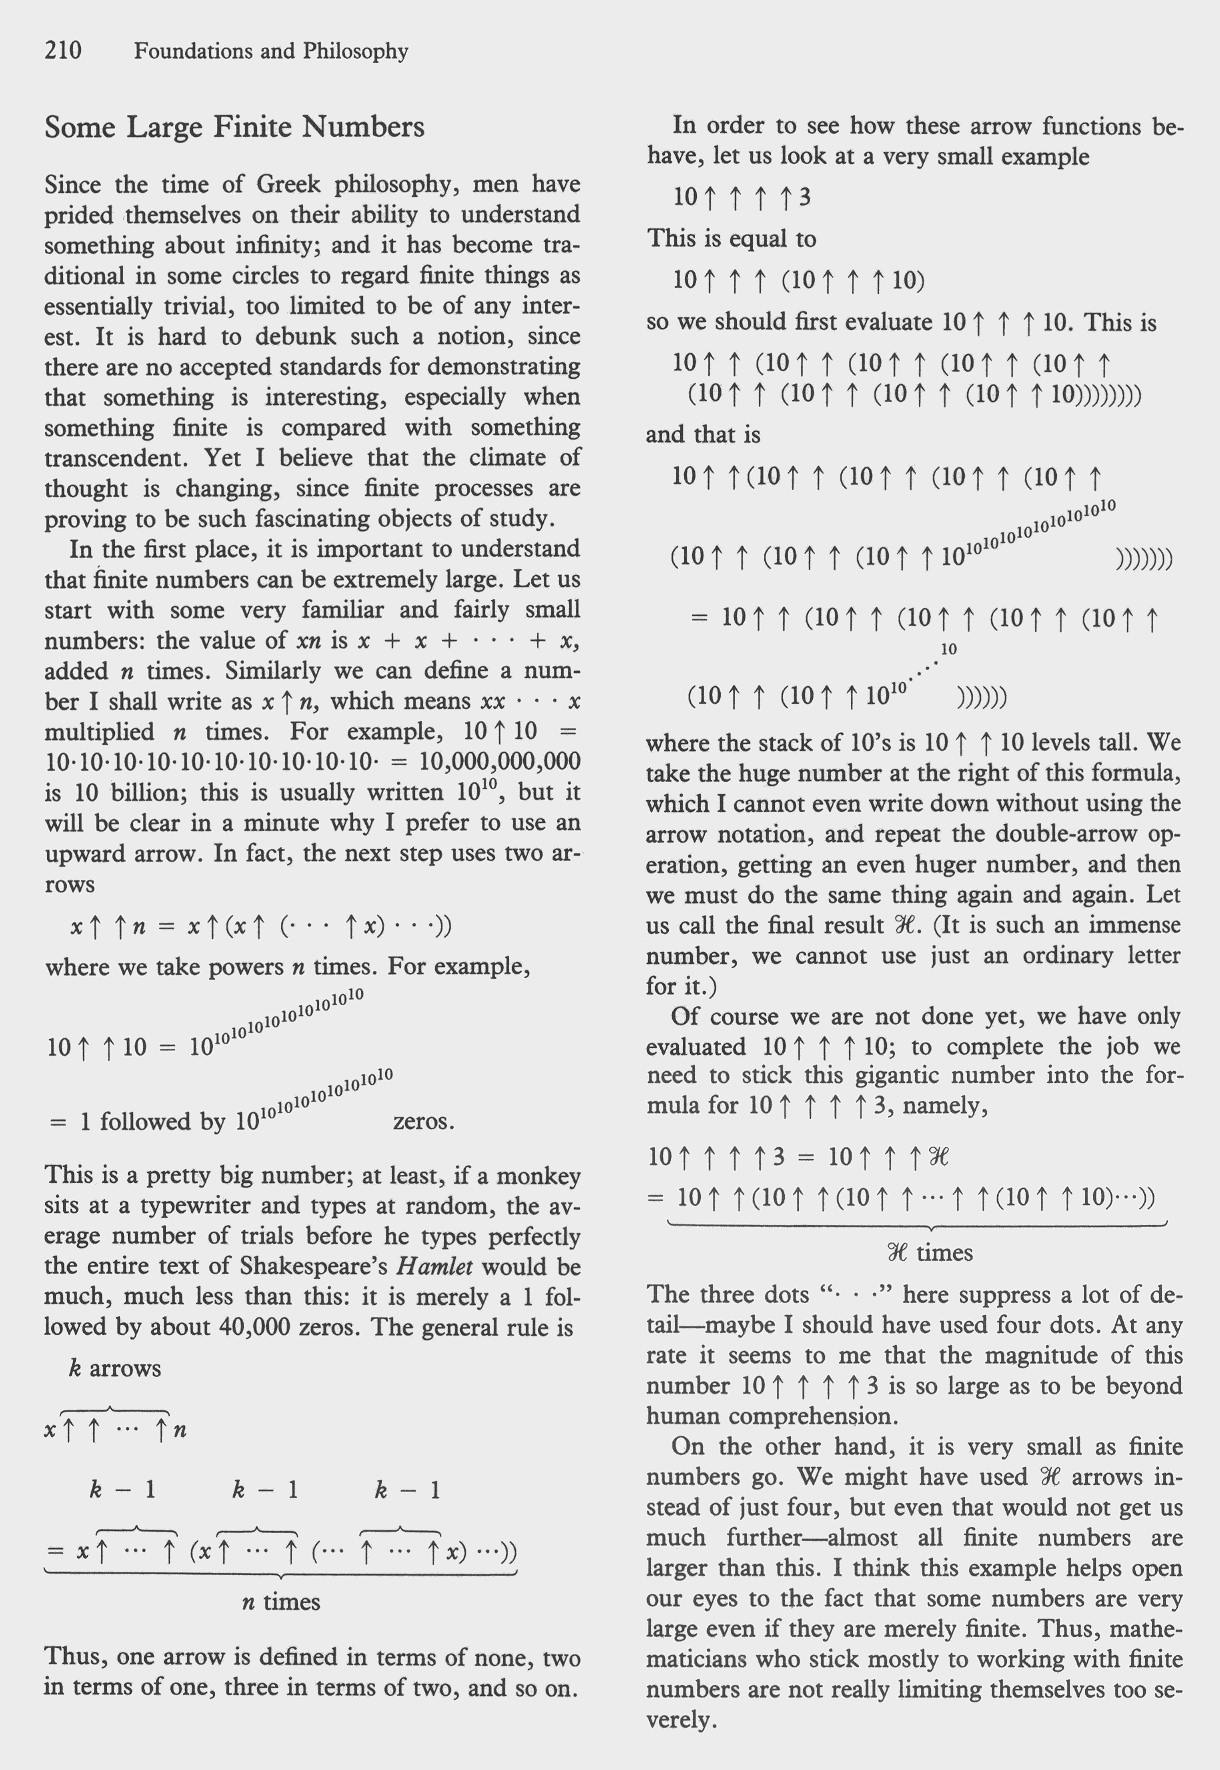 Pages on arrow notation from an article by Donald Knuth